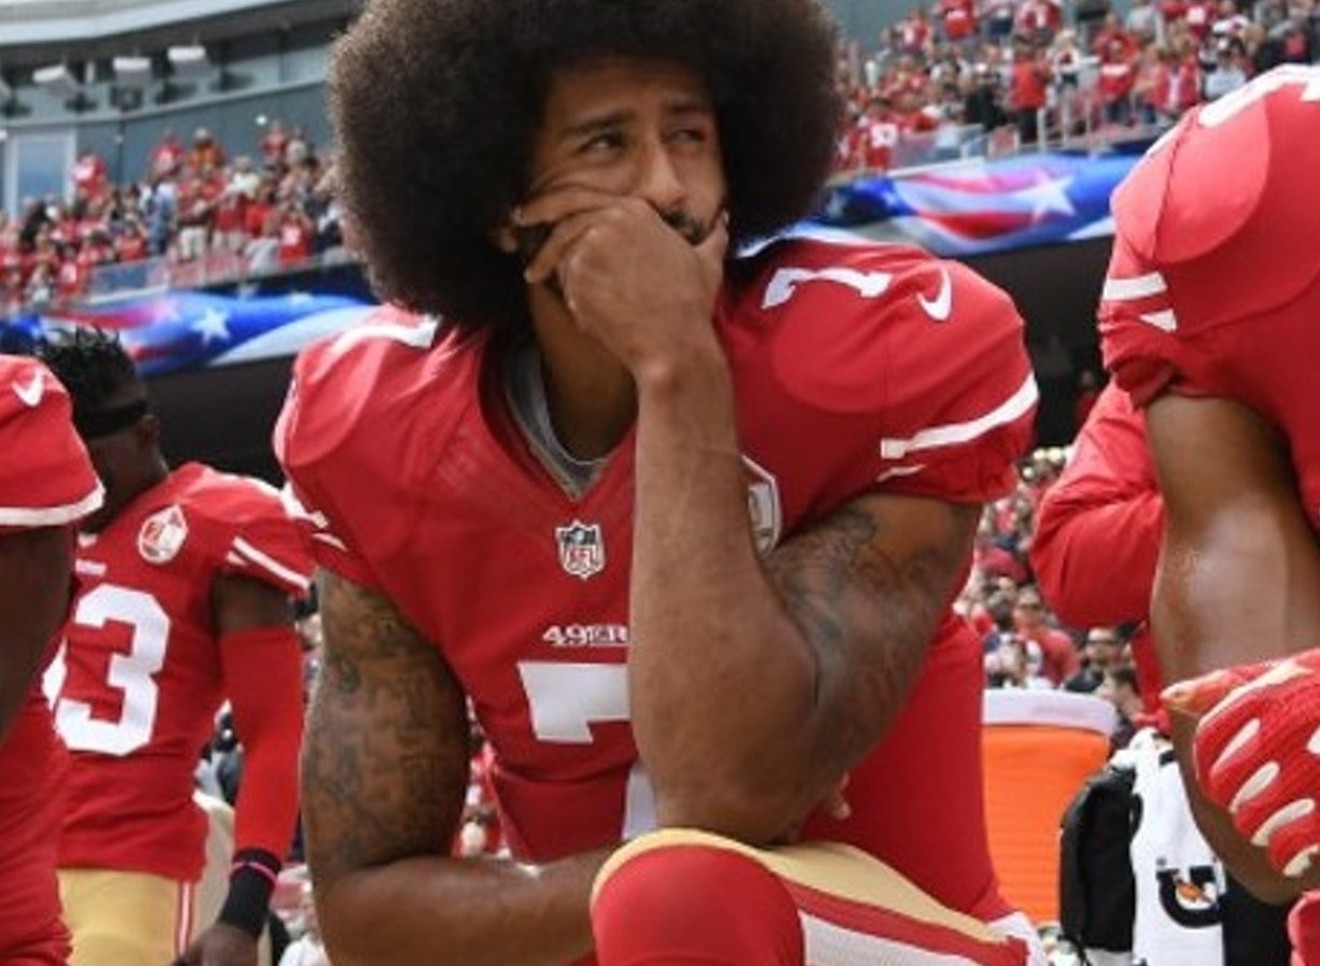 Former San Francisco 49ers quarterback Colin Kaepernick started the national anthem protests, now he can't find a job